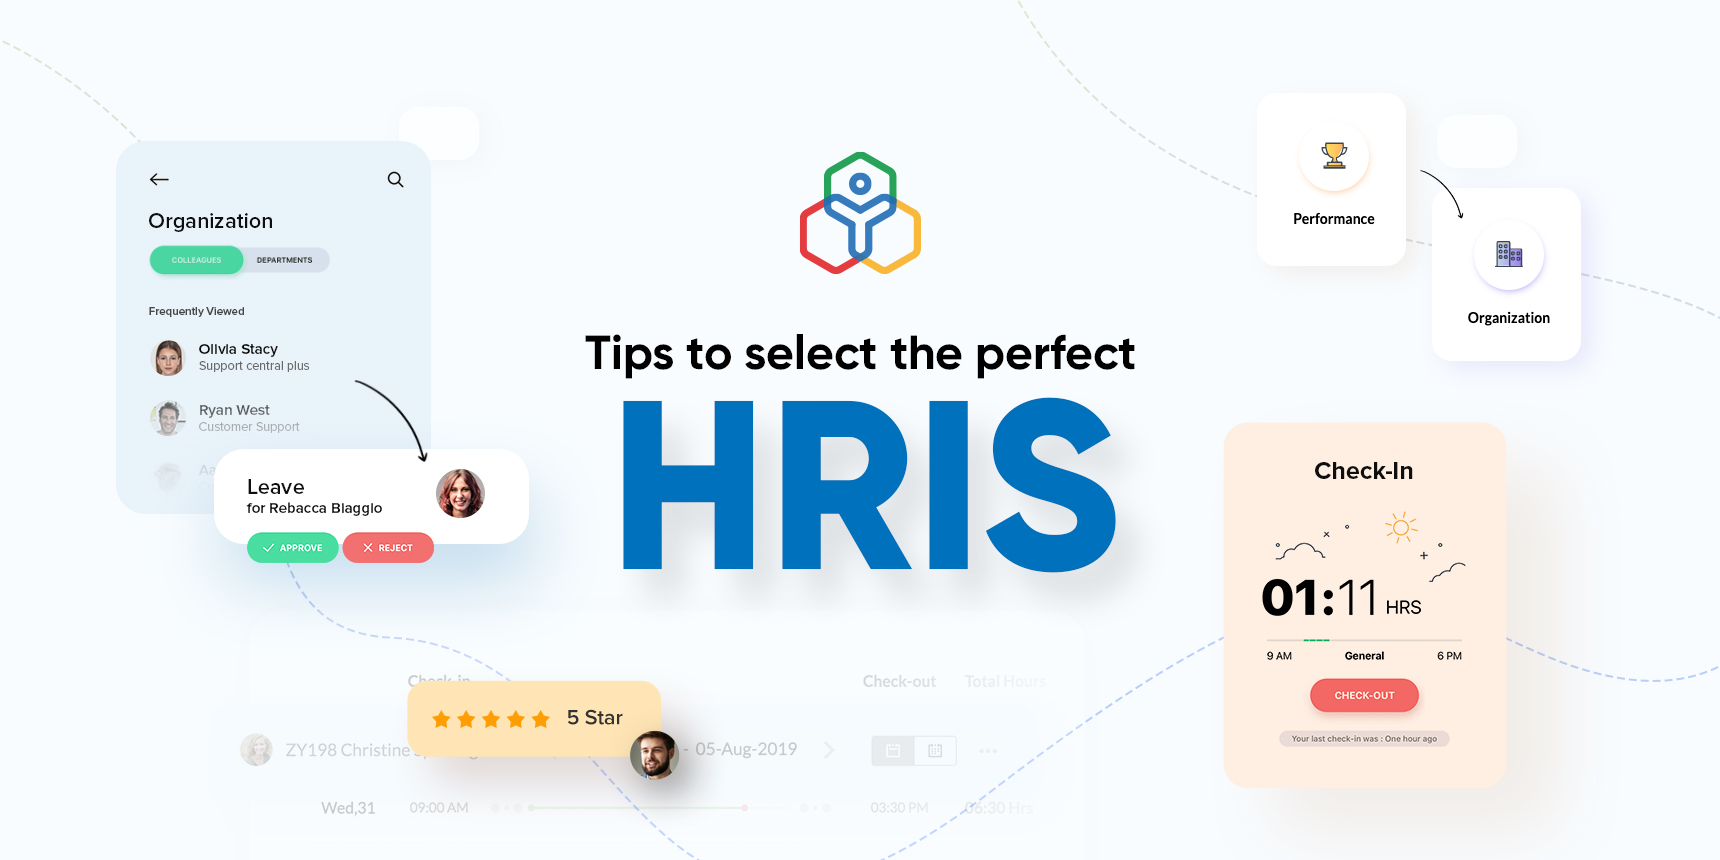 Selecting the perfect HRIS for your organization